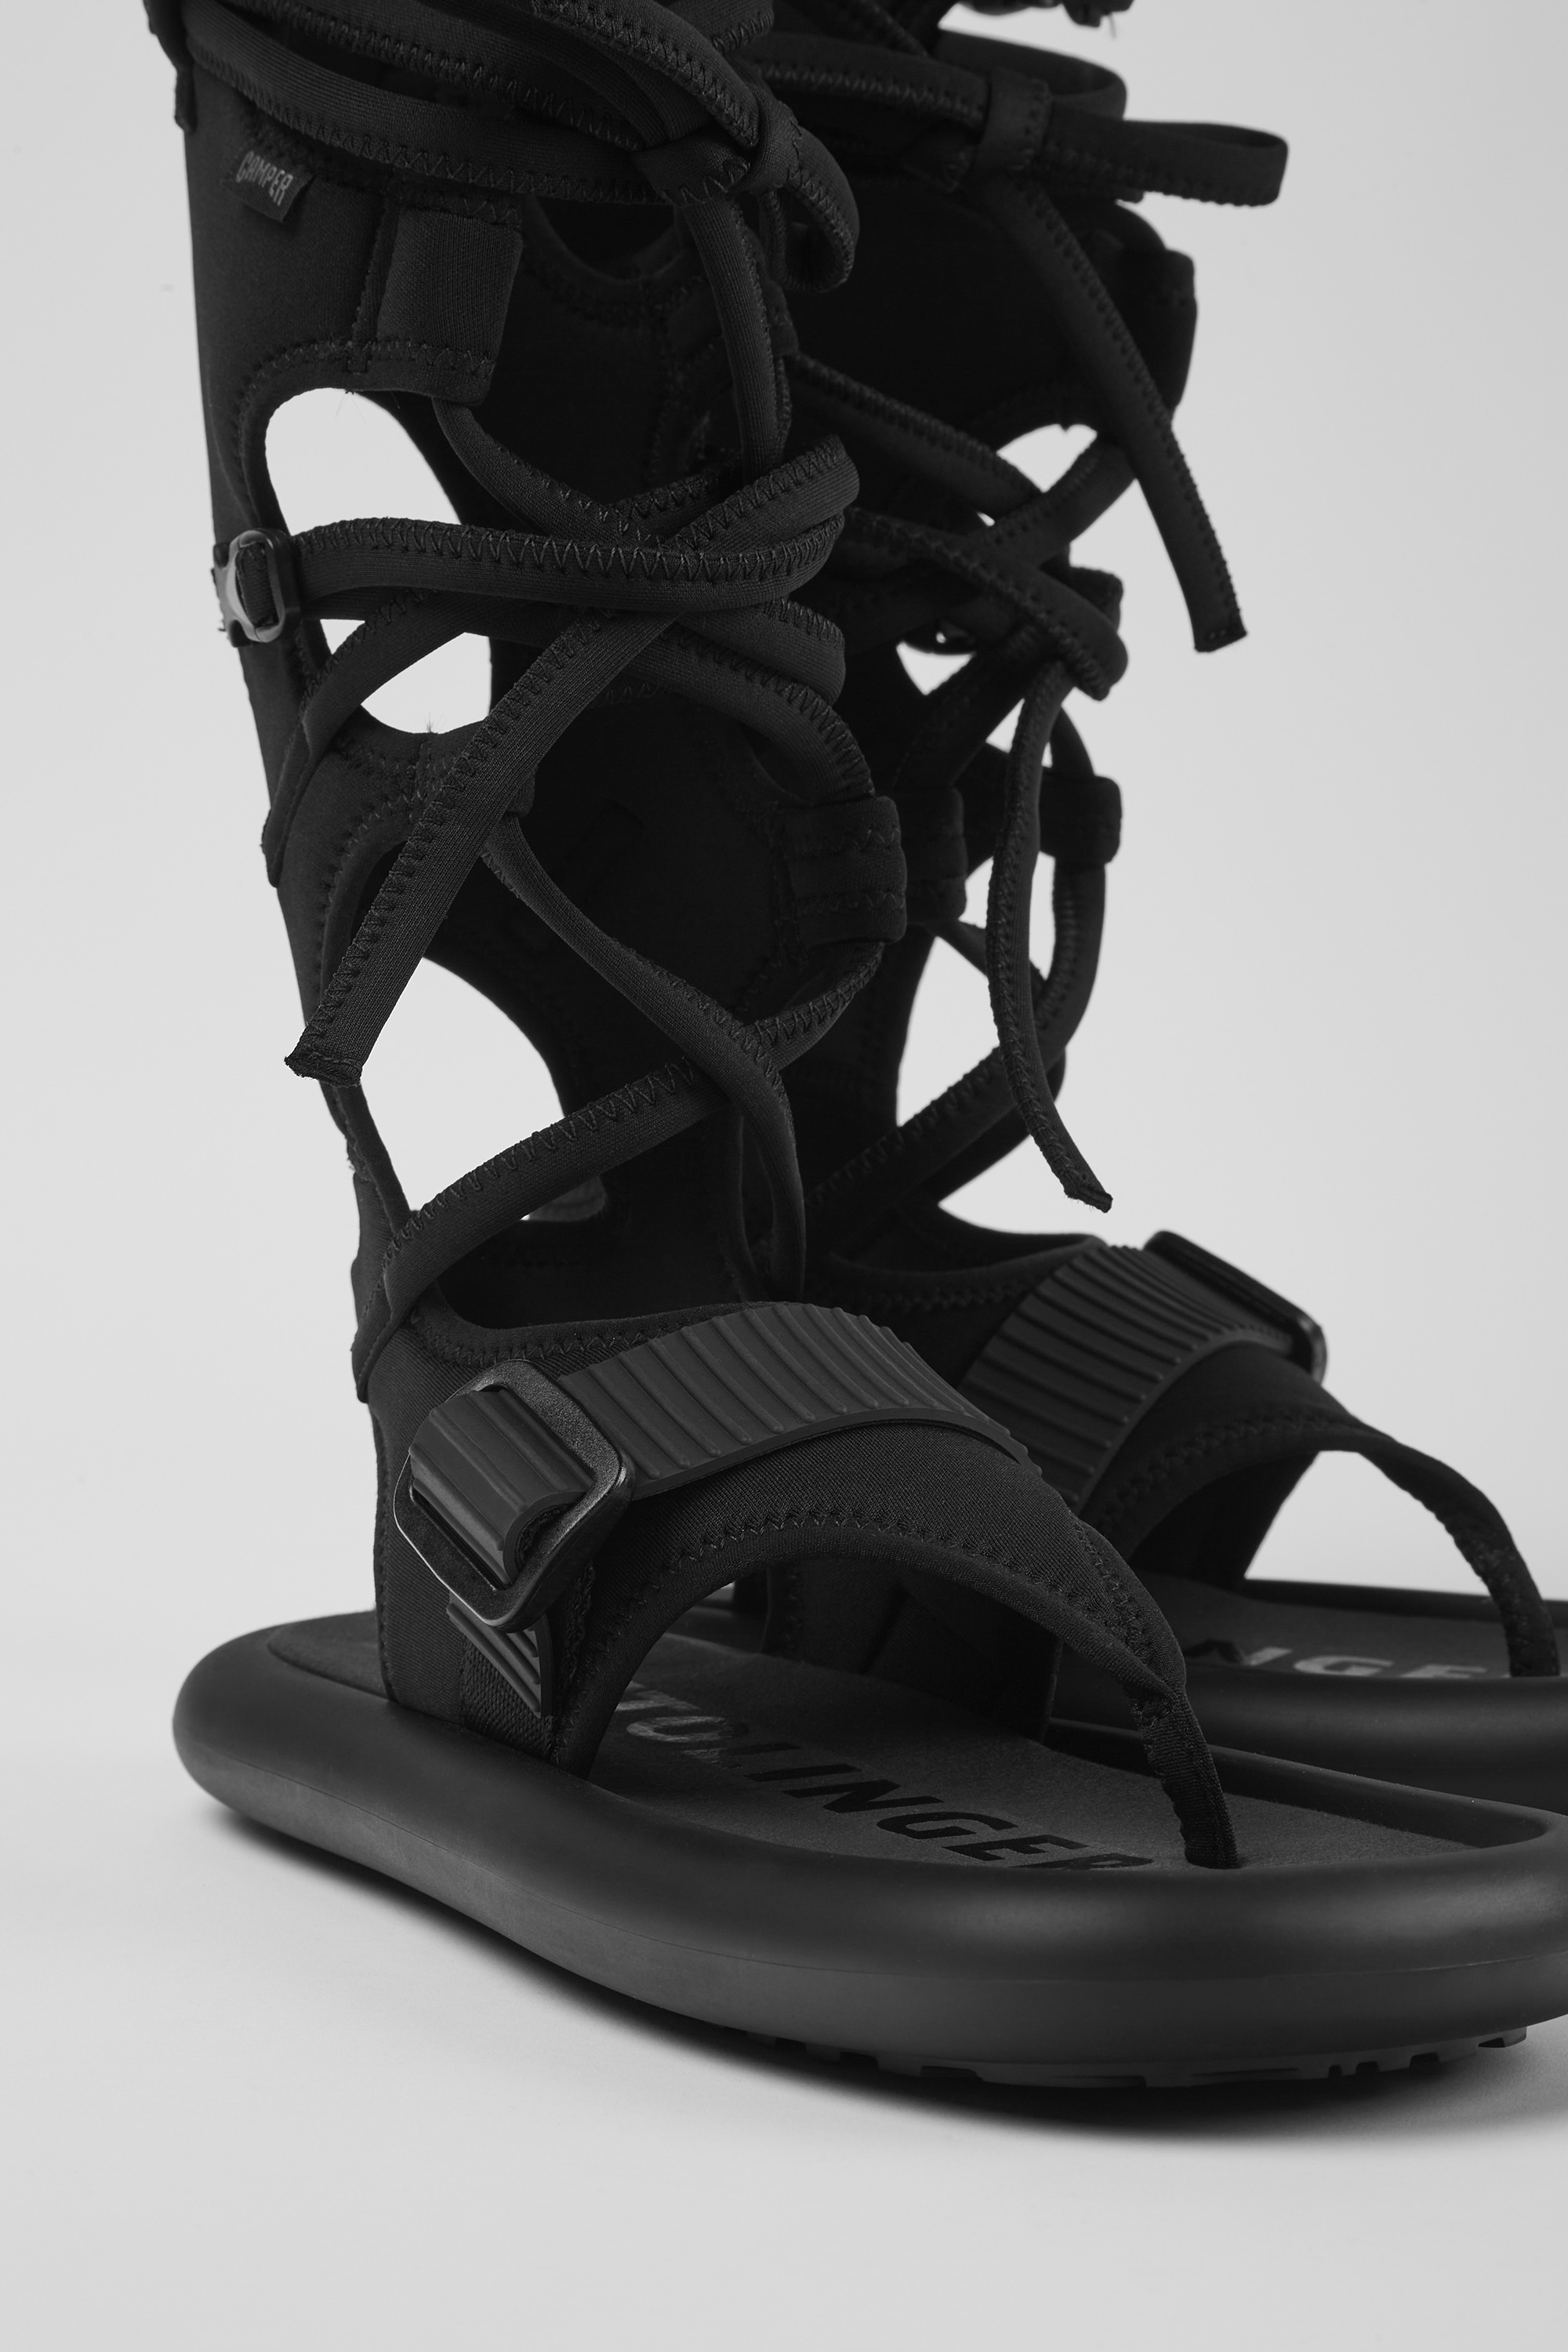 Camper Together Black Sandals for Women - Fall/Winter collection 